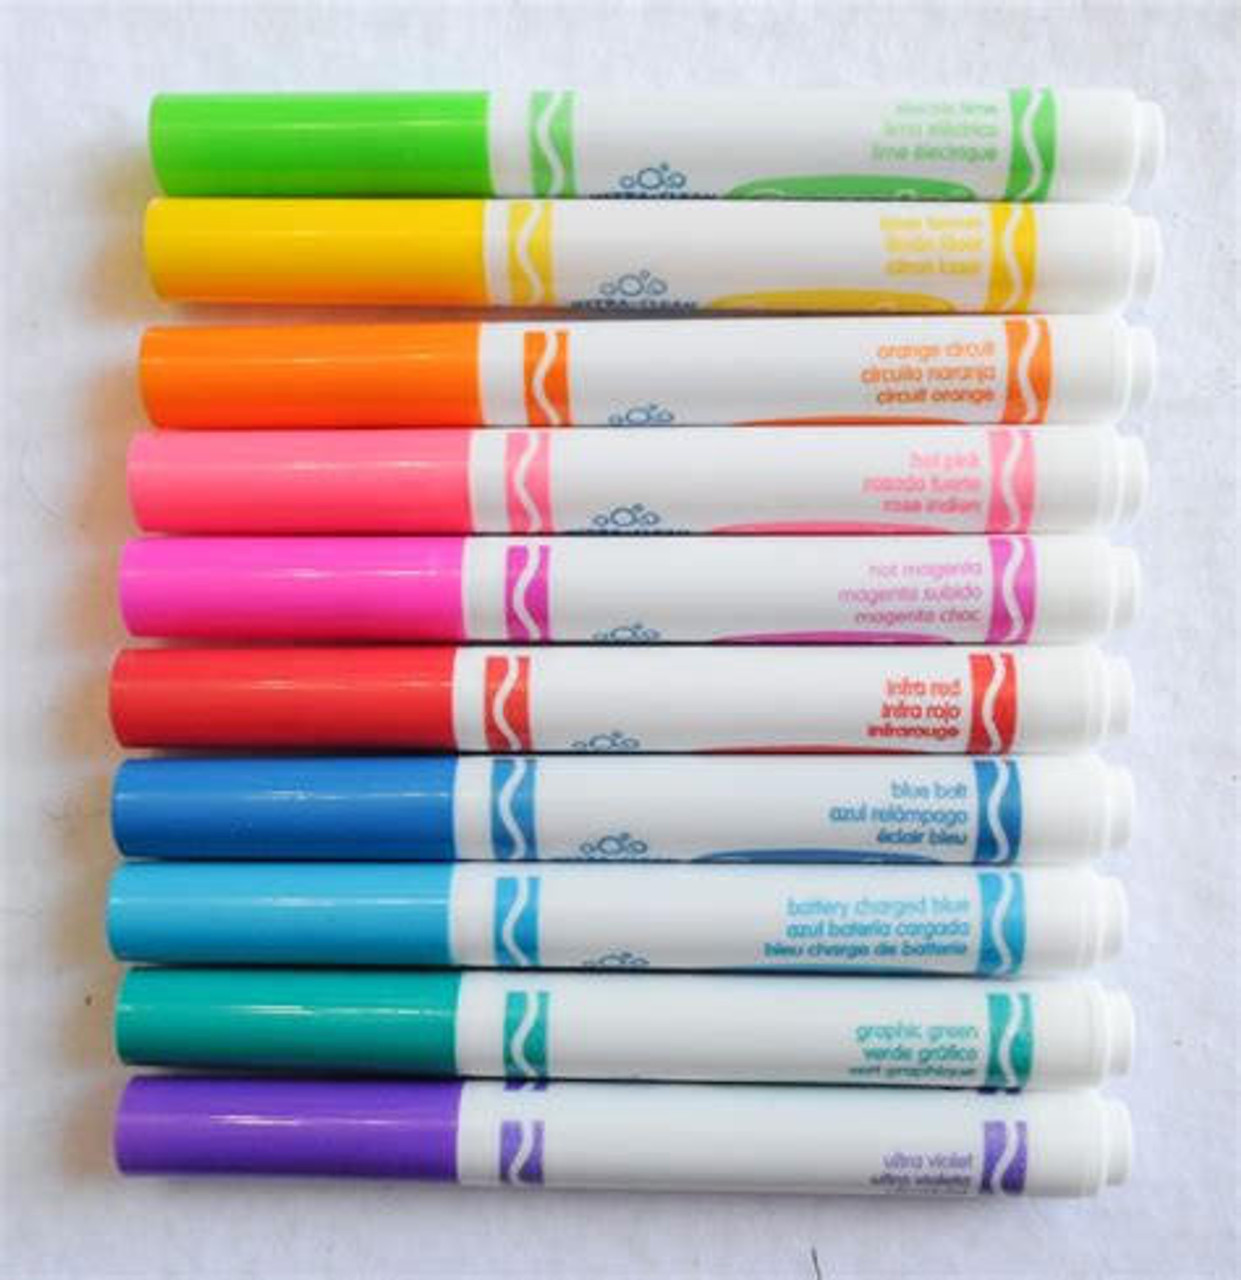 https://cdn11.bigcommerce.com/s-9uf88xhege/images/stencil/1280x1280/products/13439/64454/macphersons-broad-washable-markers-10-color-bright-shades__66039.1699998941.jpg?c=1?imbypass=on